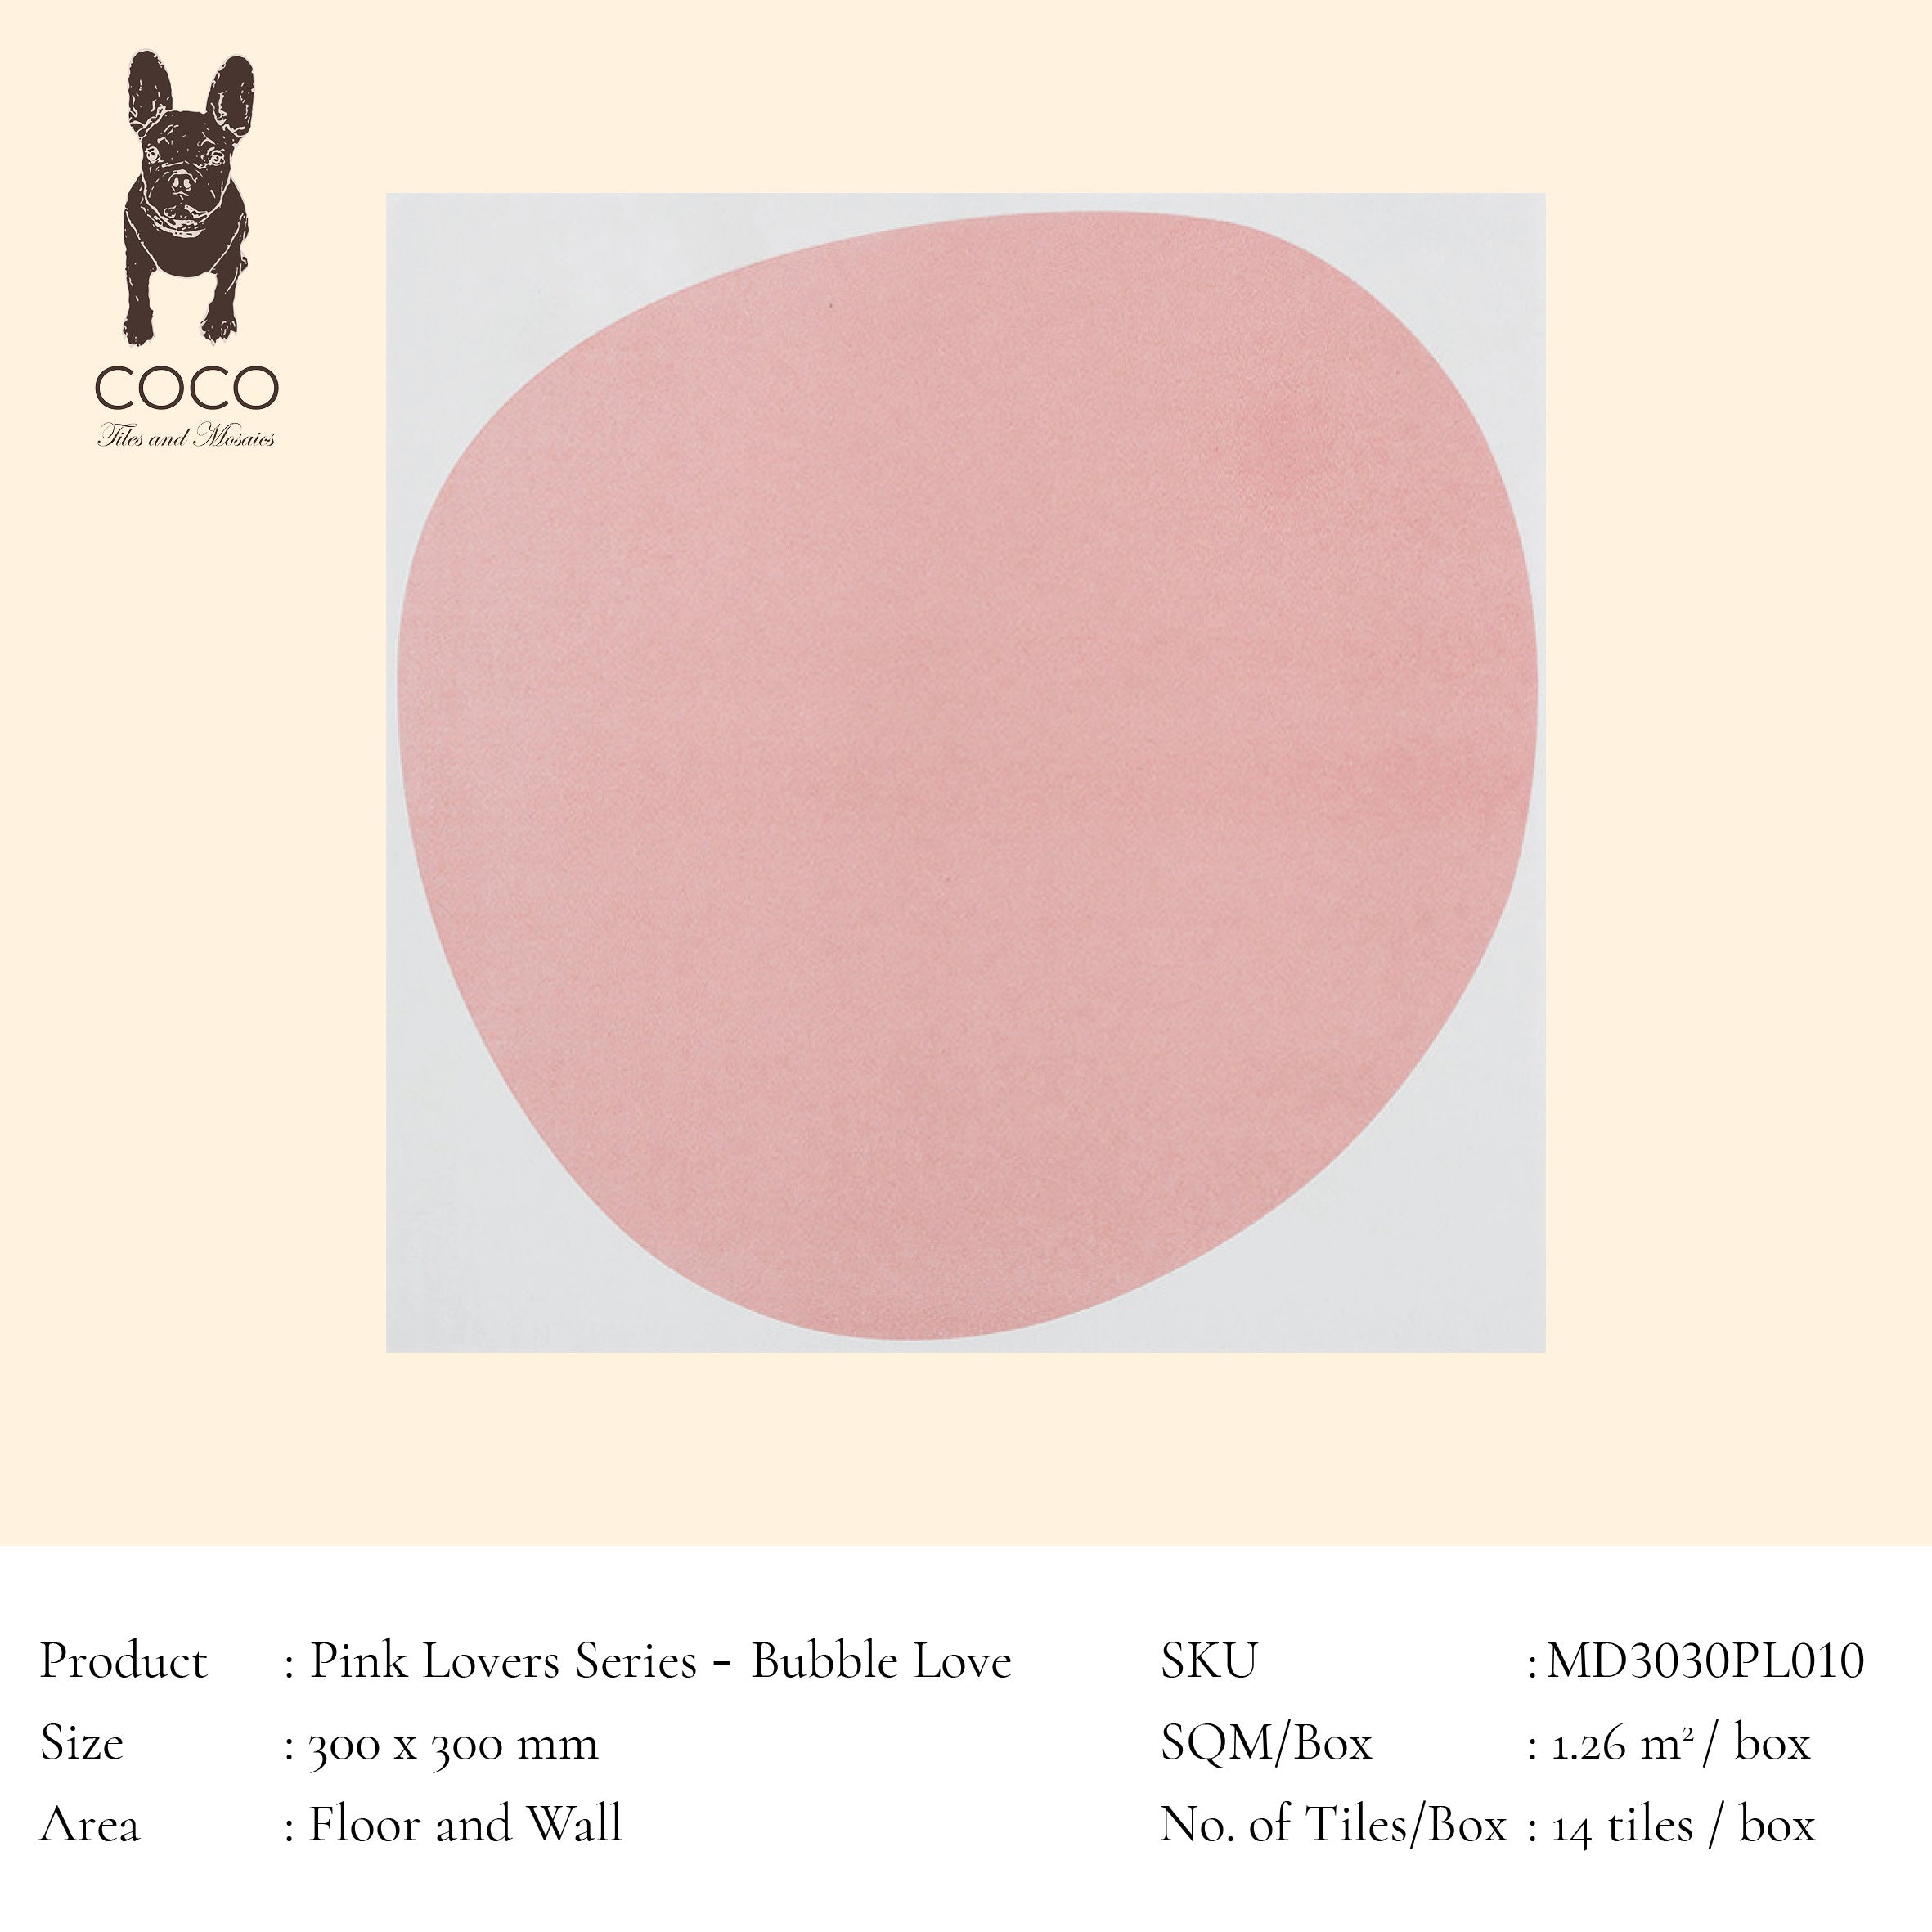 Pink Lovers Series - Bubble Love 300x300mm Ceramic Tile